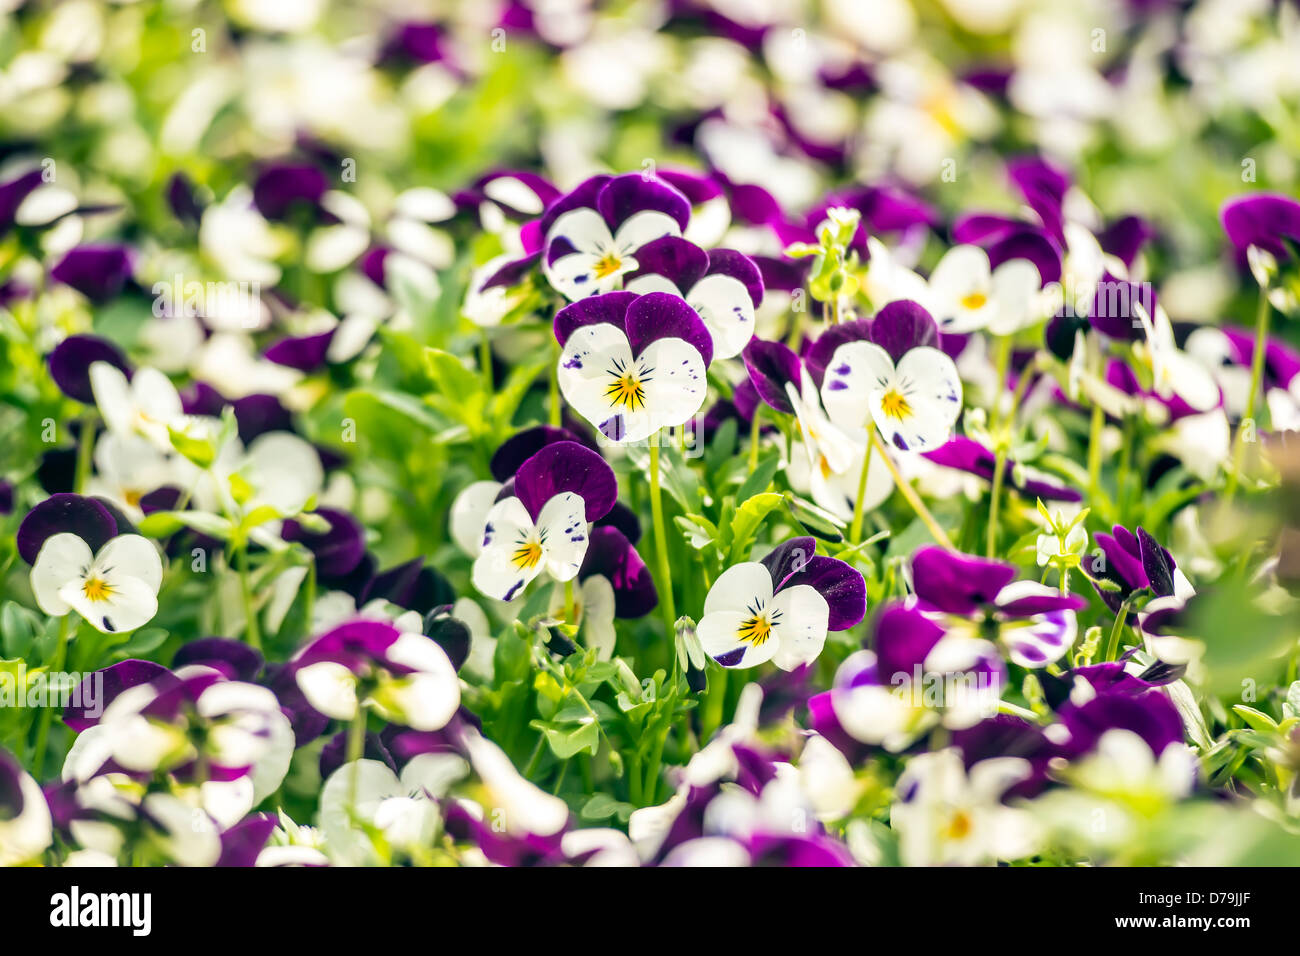 Beautiful purple pansy flowers in spring garden Stock Photo